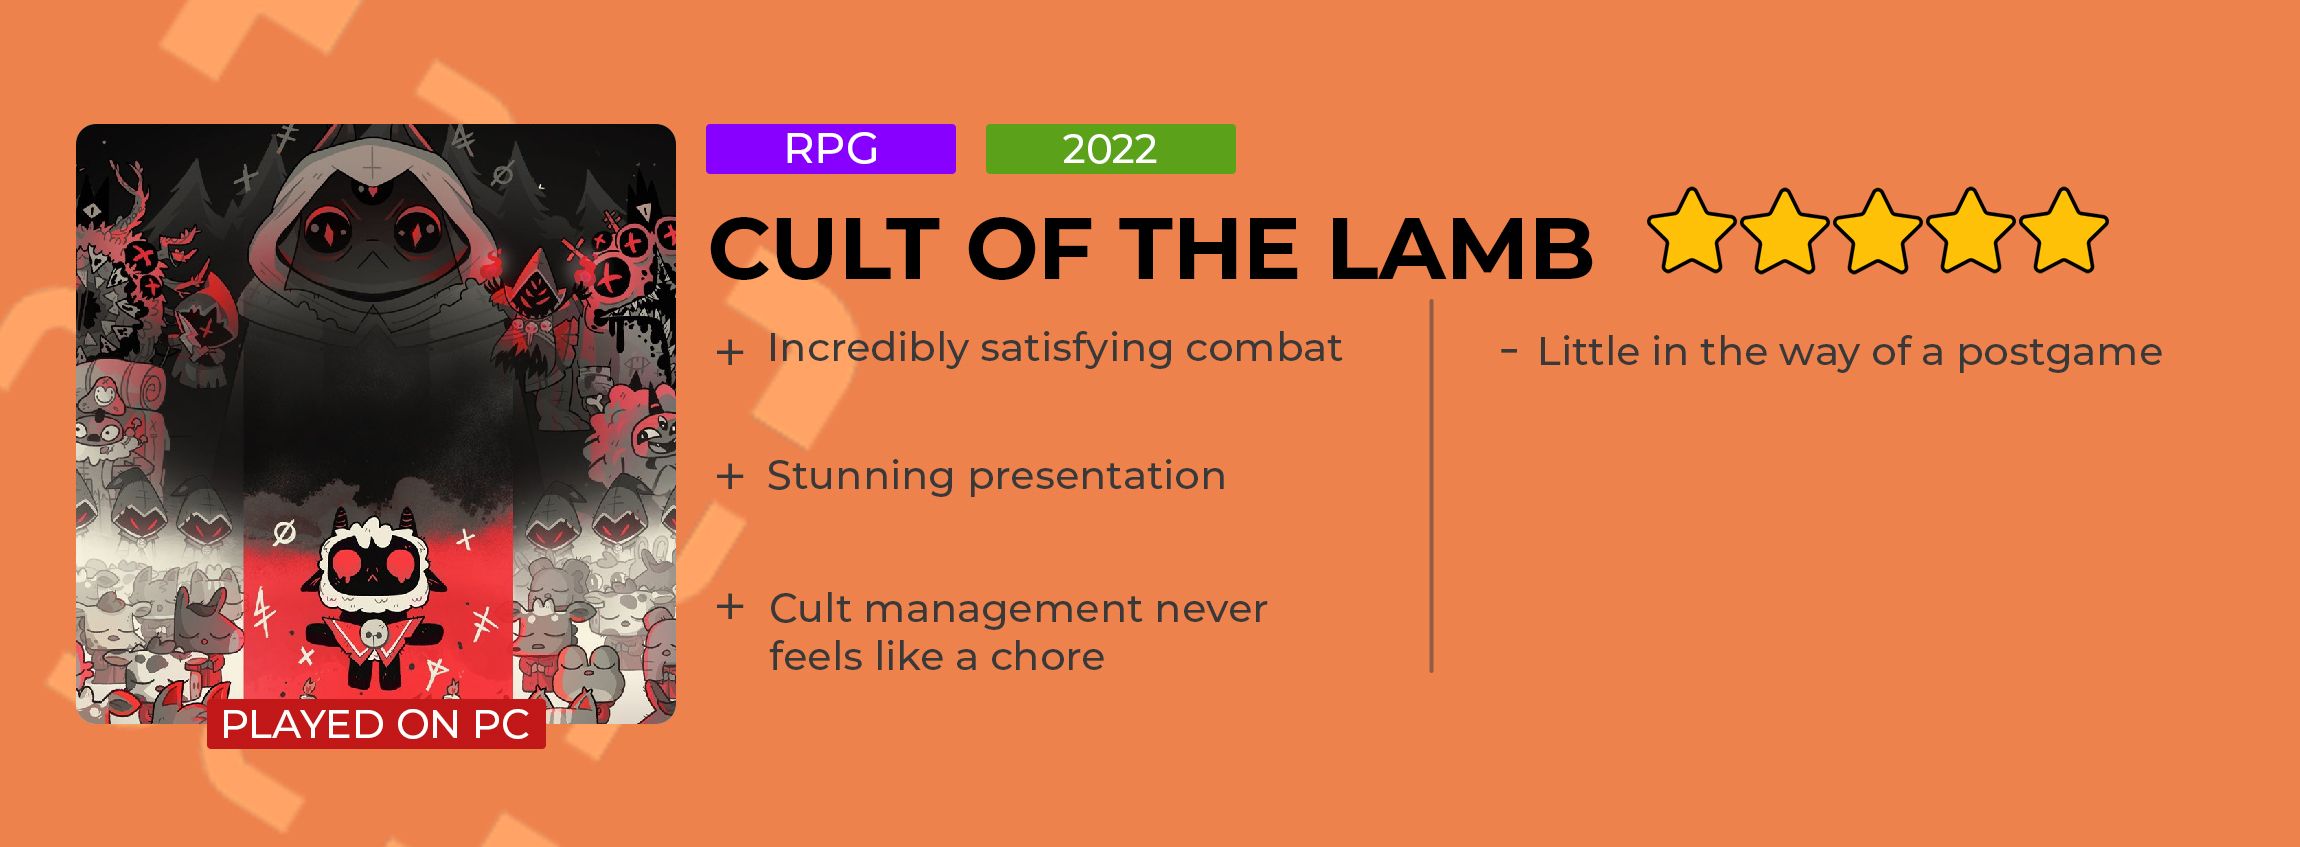 cult of the lamb review card